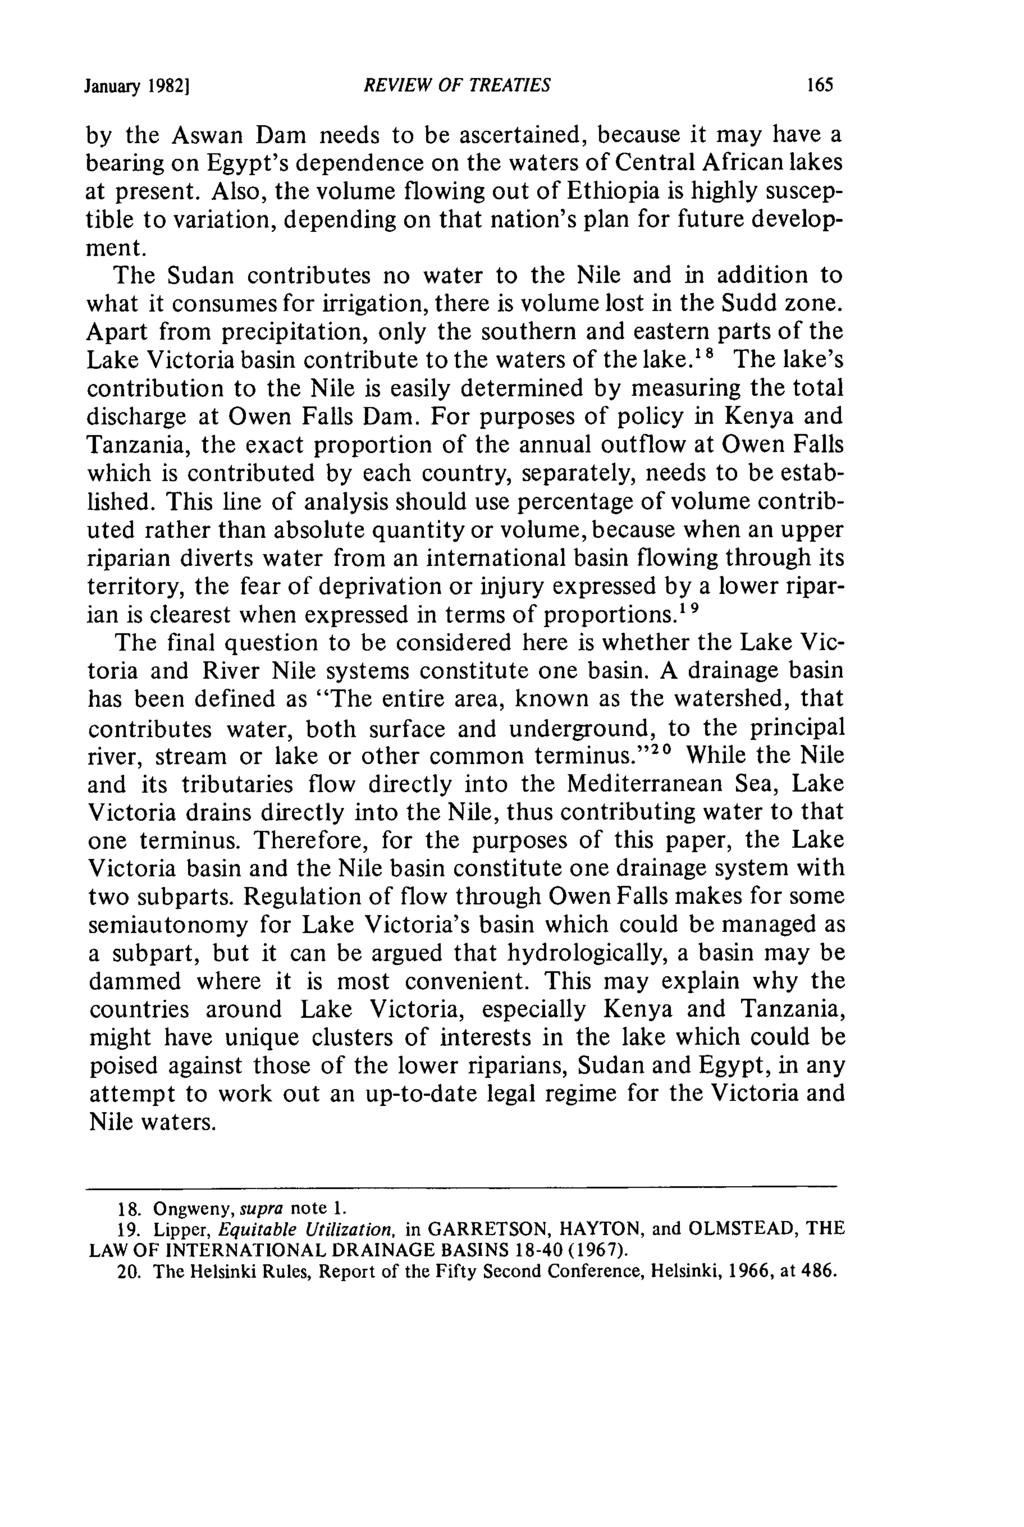 January 19821 REVIEW OF TREATIES by the Aswan Dam needs to be ascertained, because it may have a bearing on Egypt's dependence on the waters of Central African lakes at present.